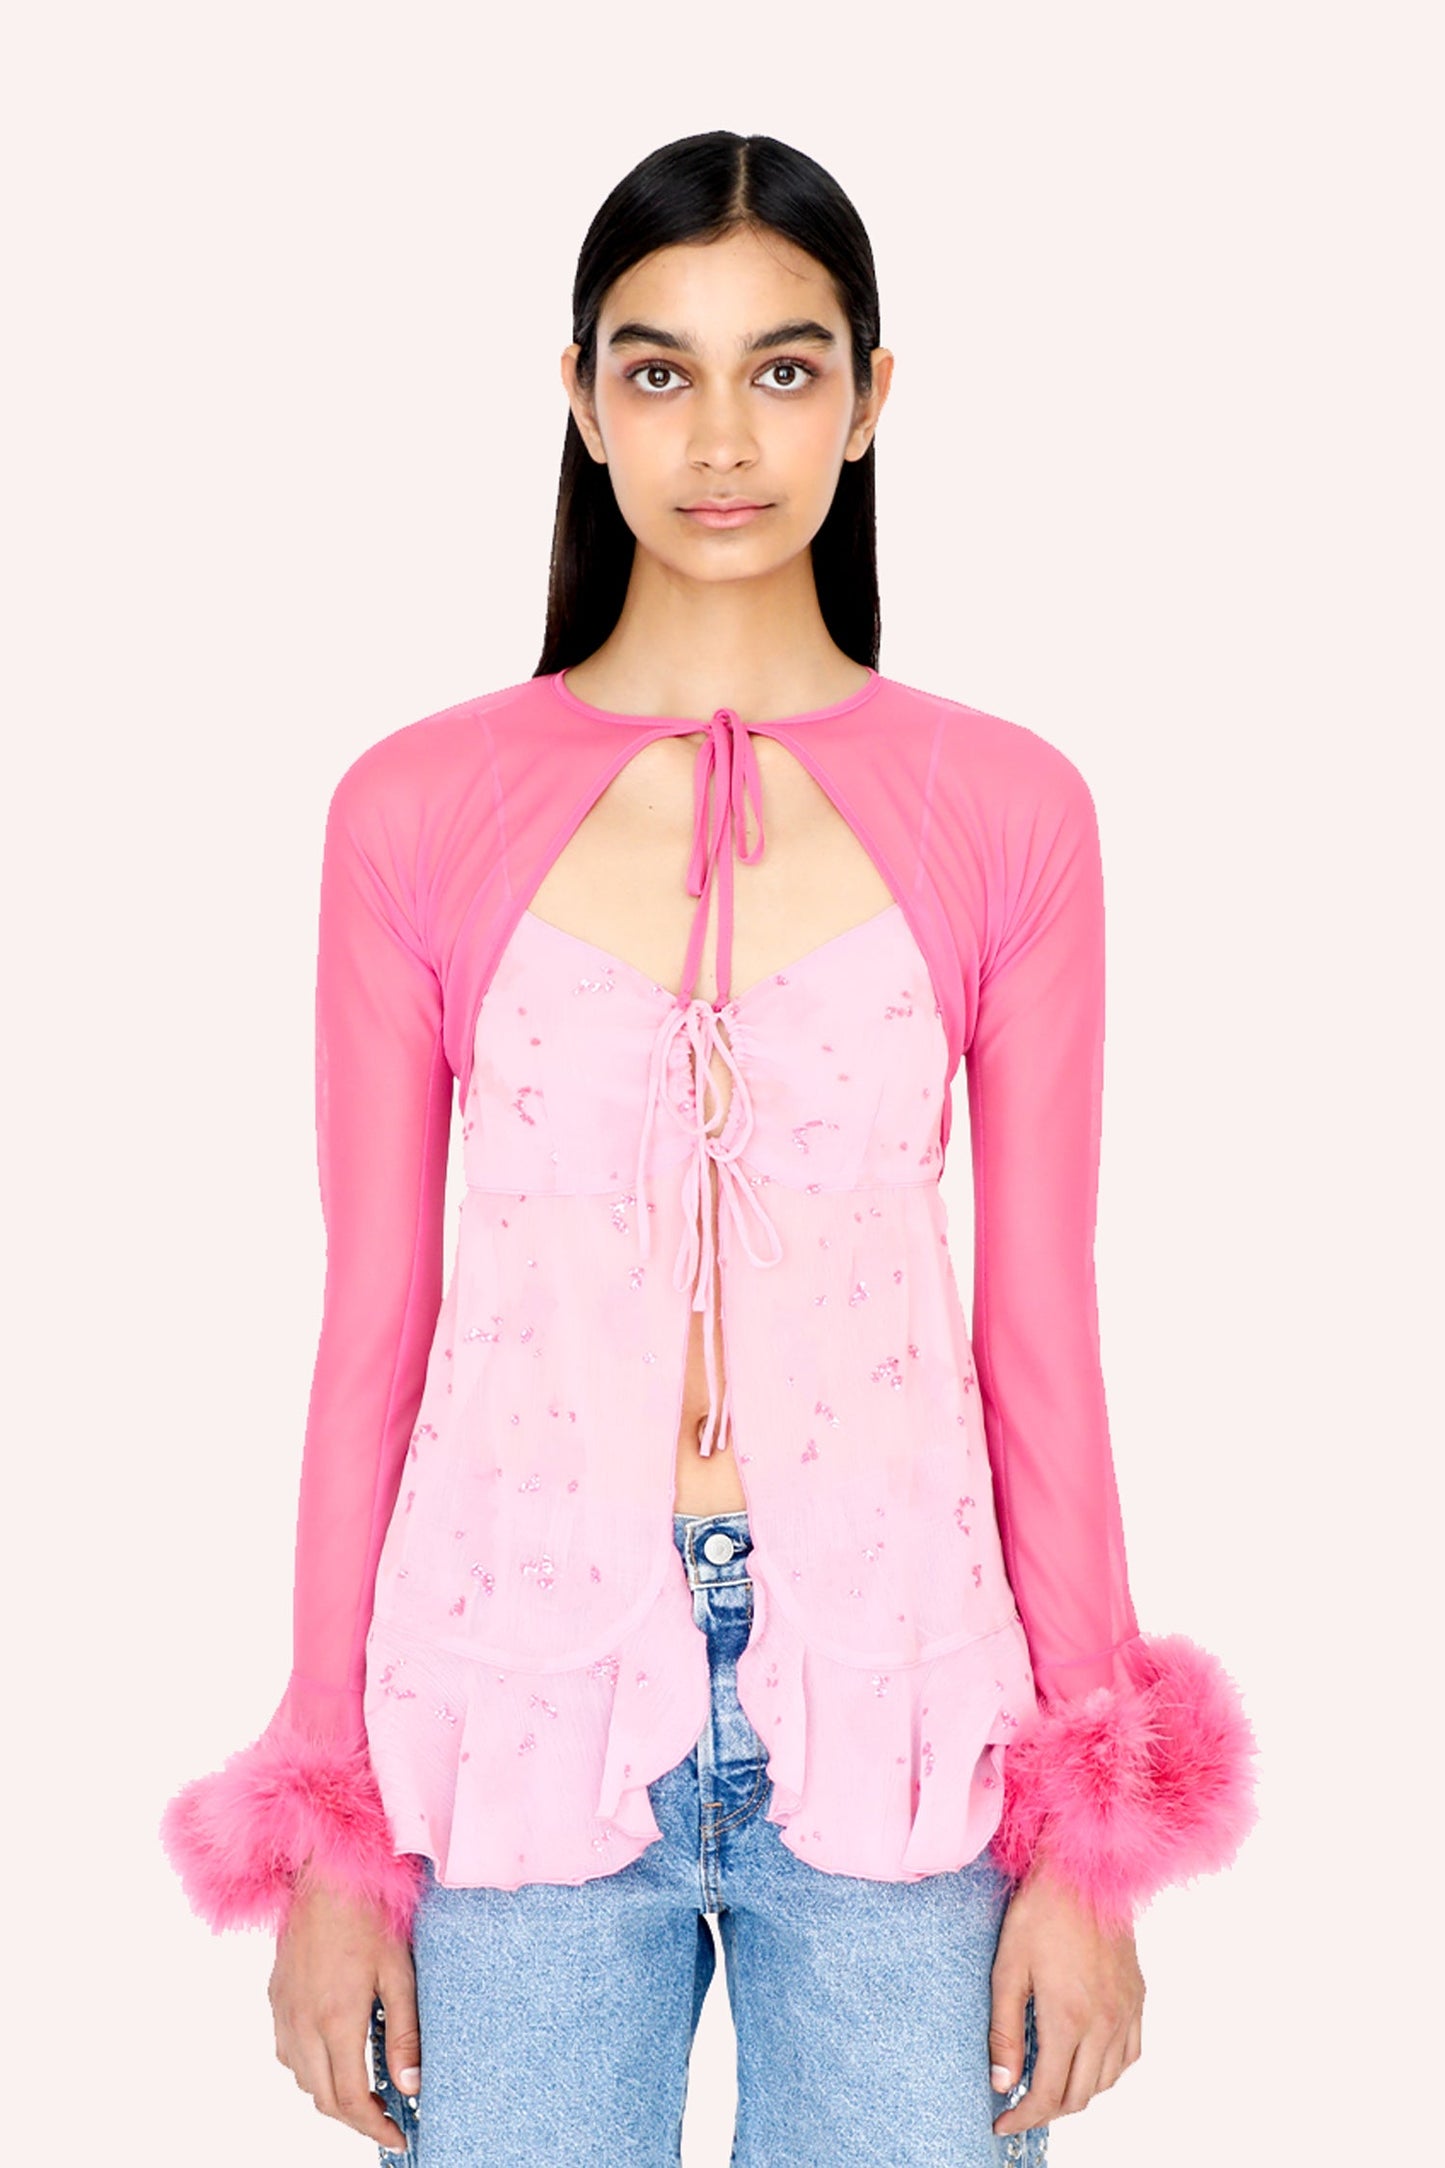 Mesh Bolero pink, long sleeves, fluffy fur at wrist, brown lace at neckline to ties up, open in front